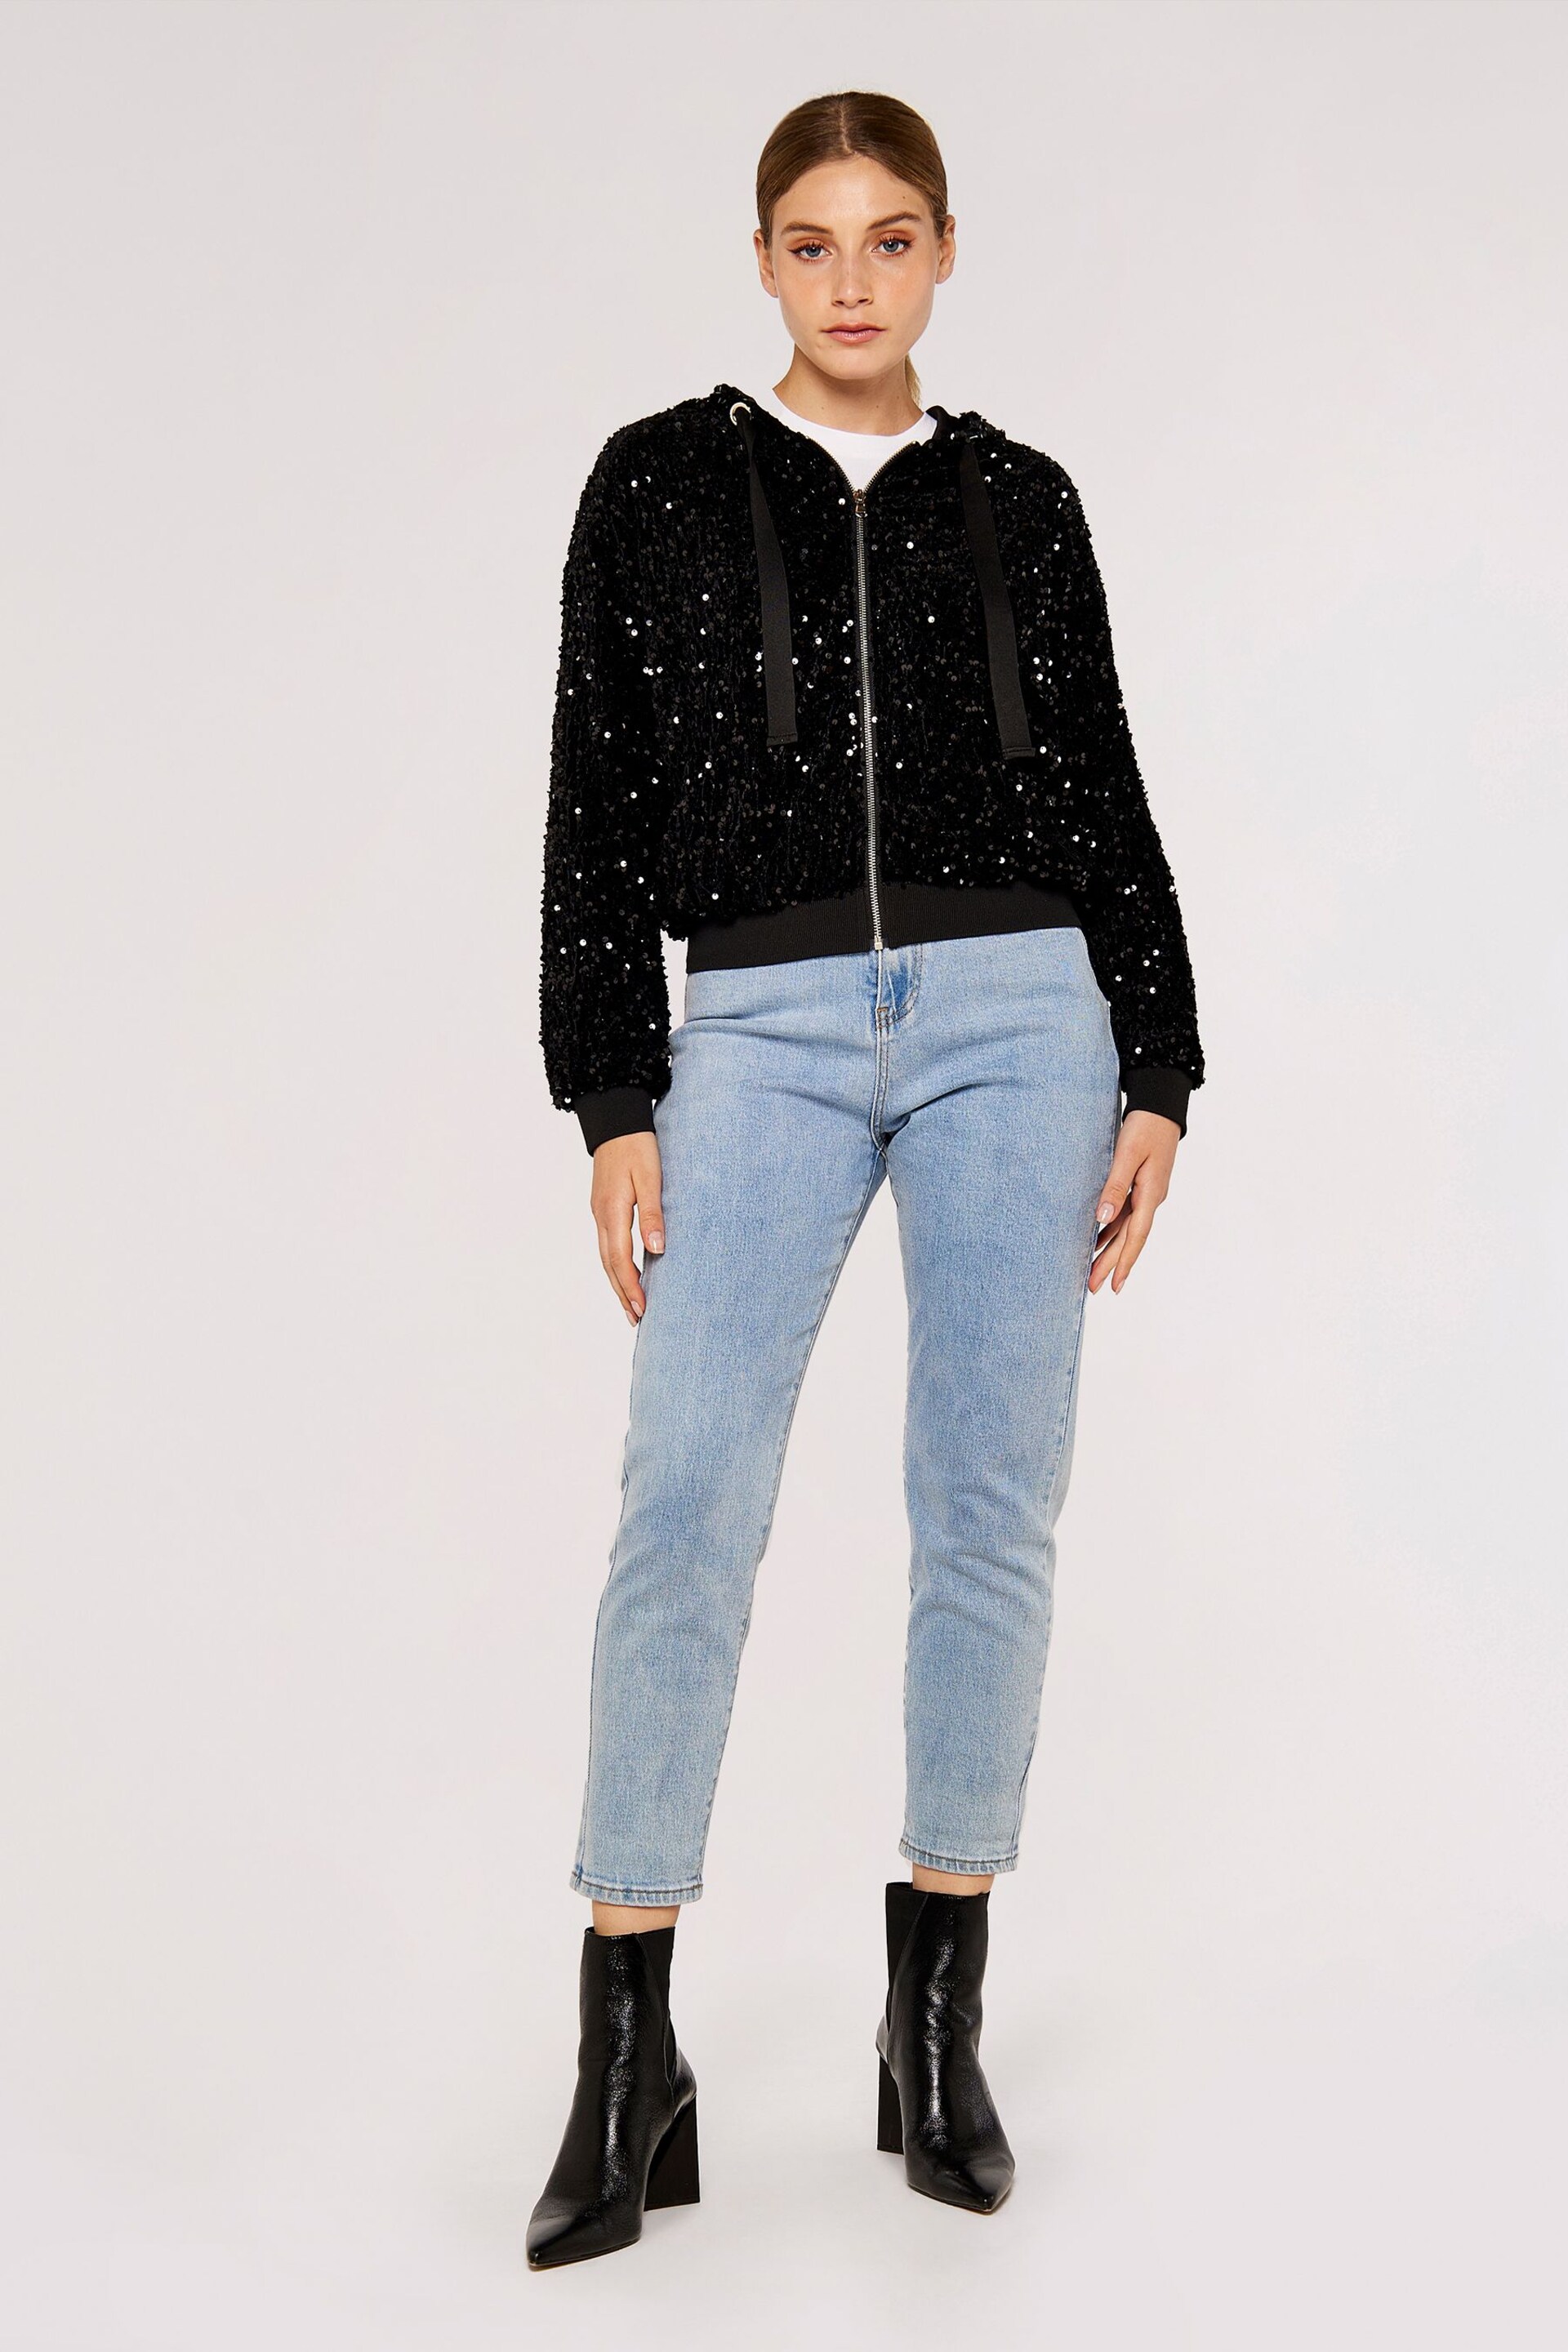 Apricot Black All Over Sequin Bomber Jacket - Image 3 of 5